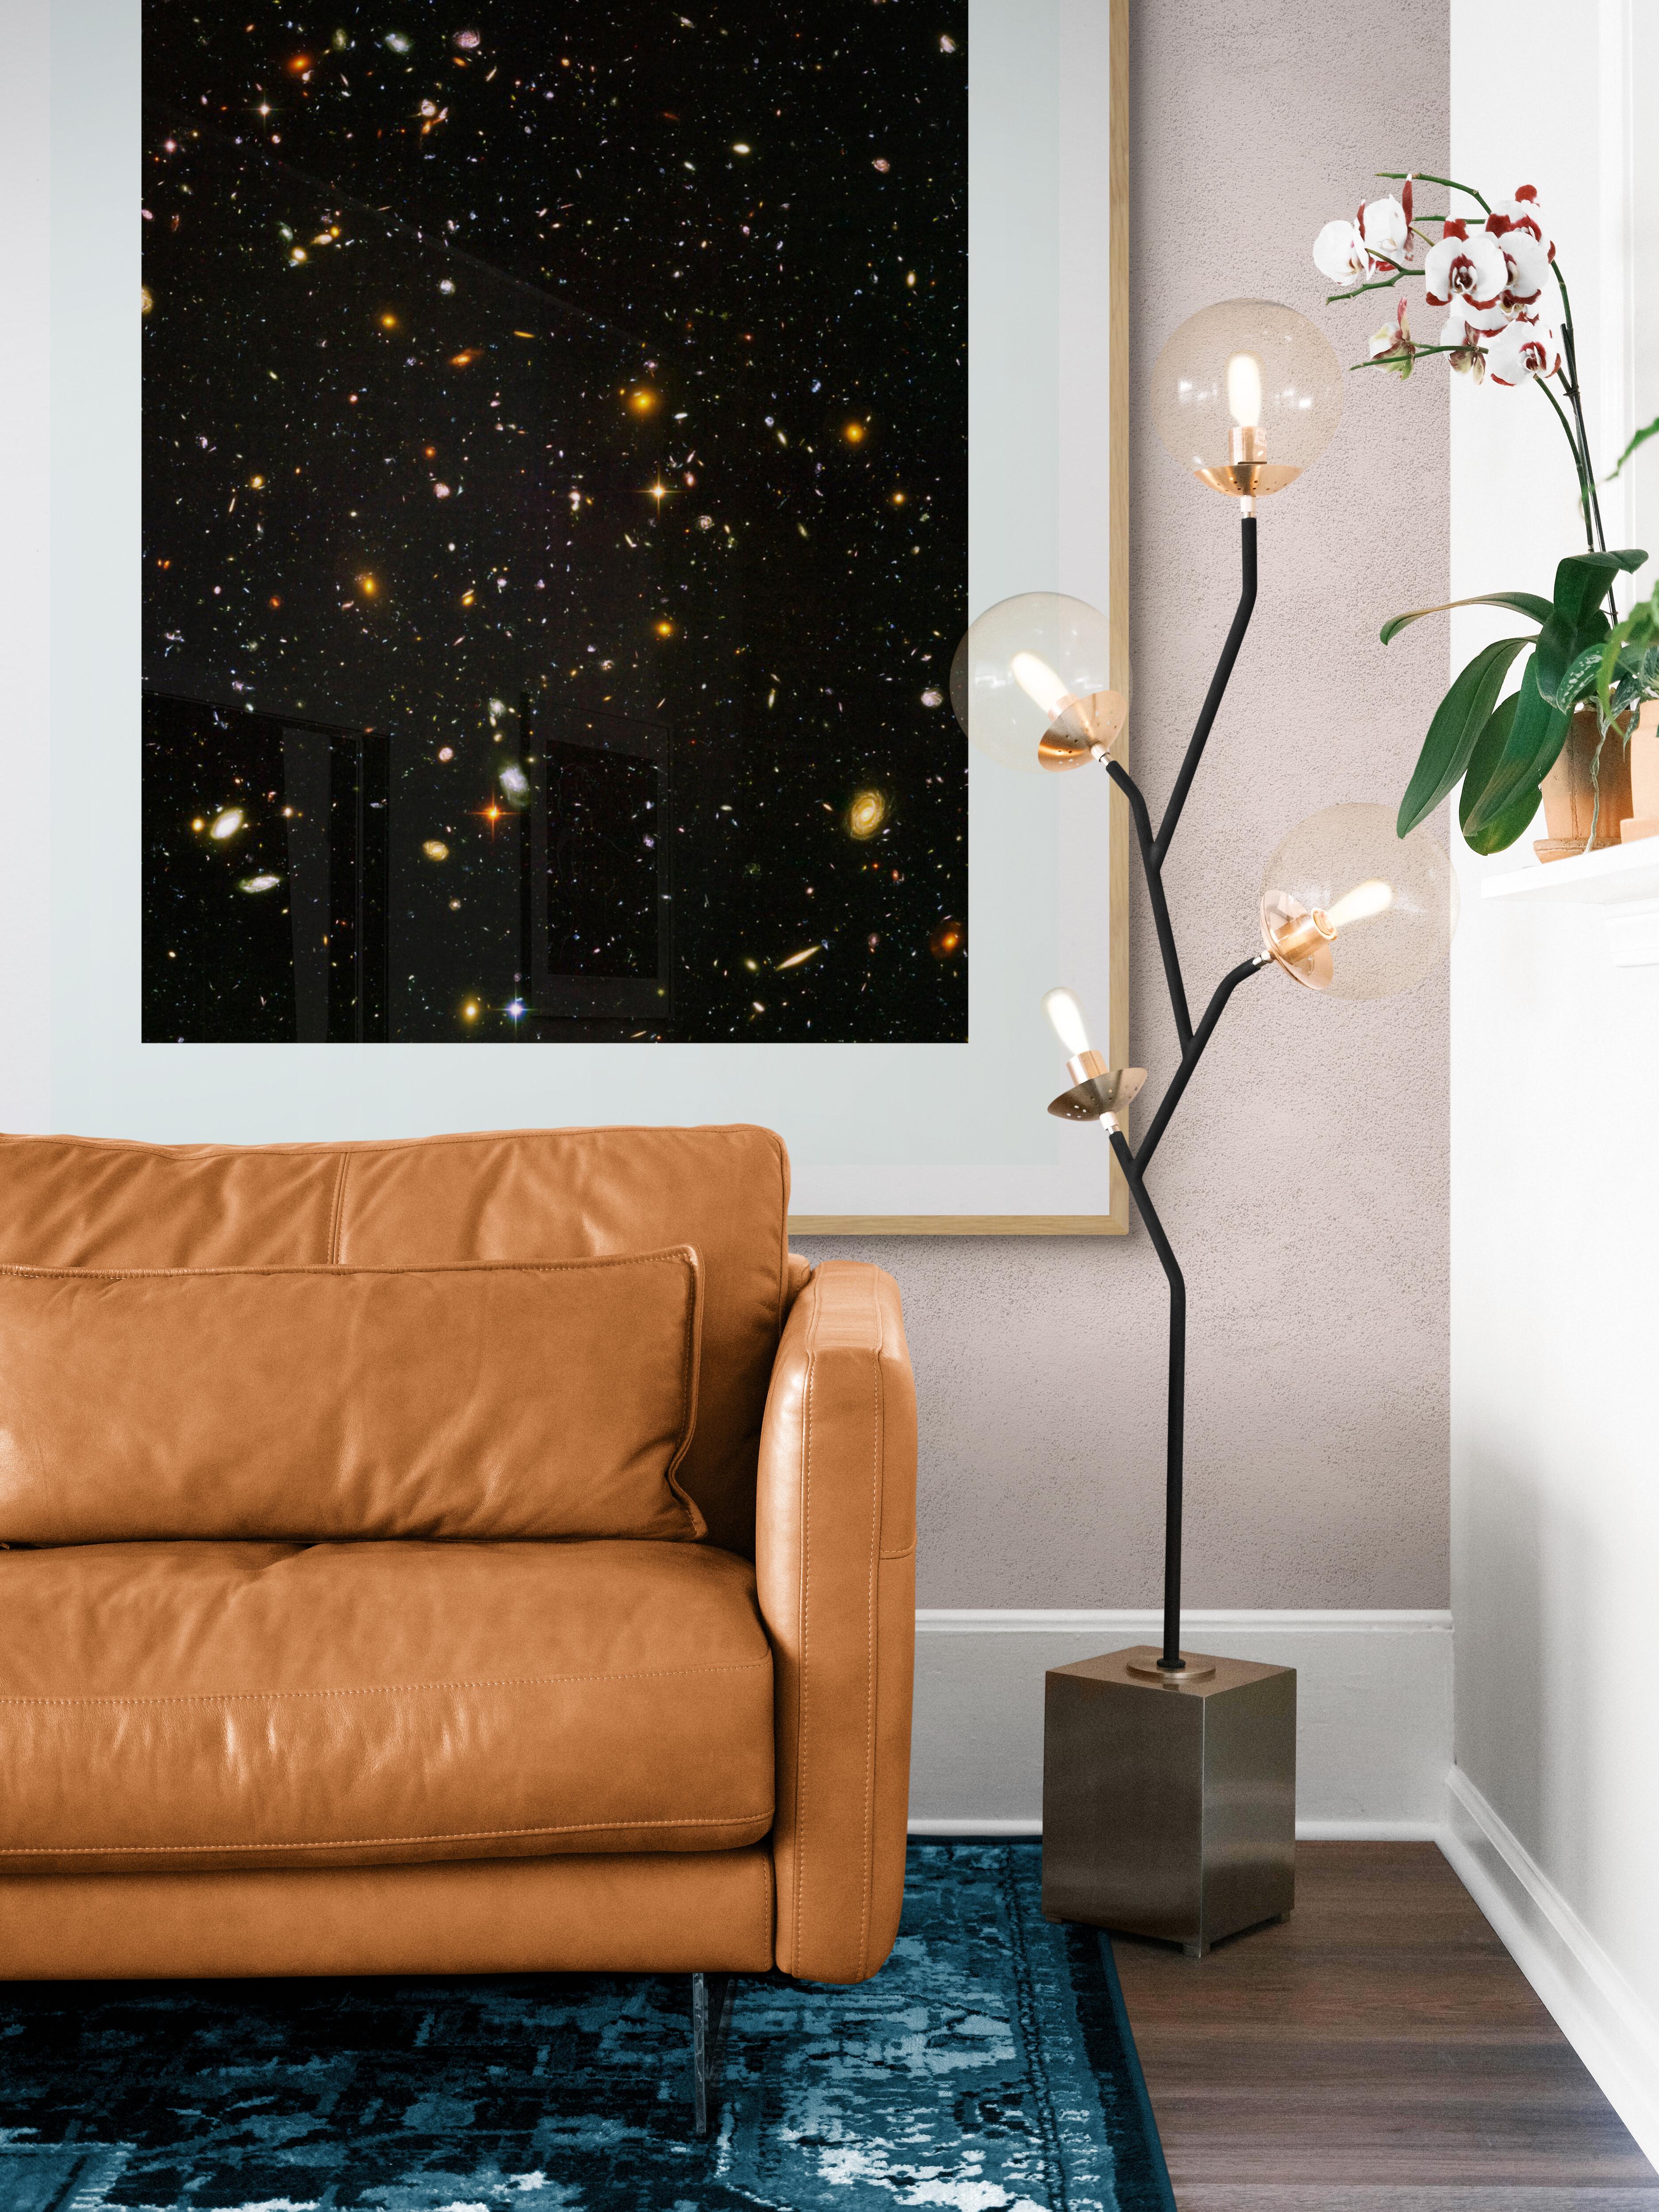 Original museum grade exhibition prints on acid-free archival photographic paper.

The bright clusters and nebulae of planet Earth's night sky are often named for flowers or insects. Though its wingspan covers over 3 light-years, NGC 6302 is no